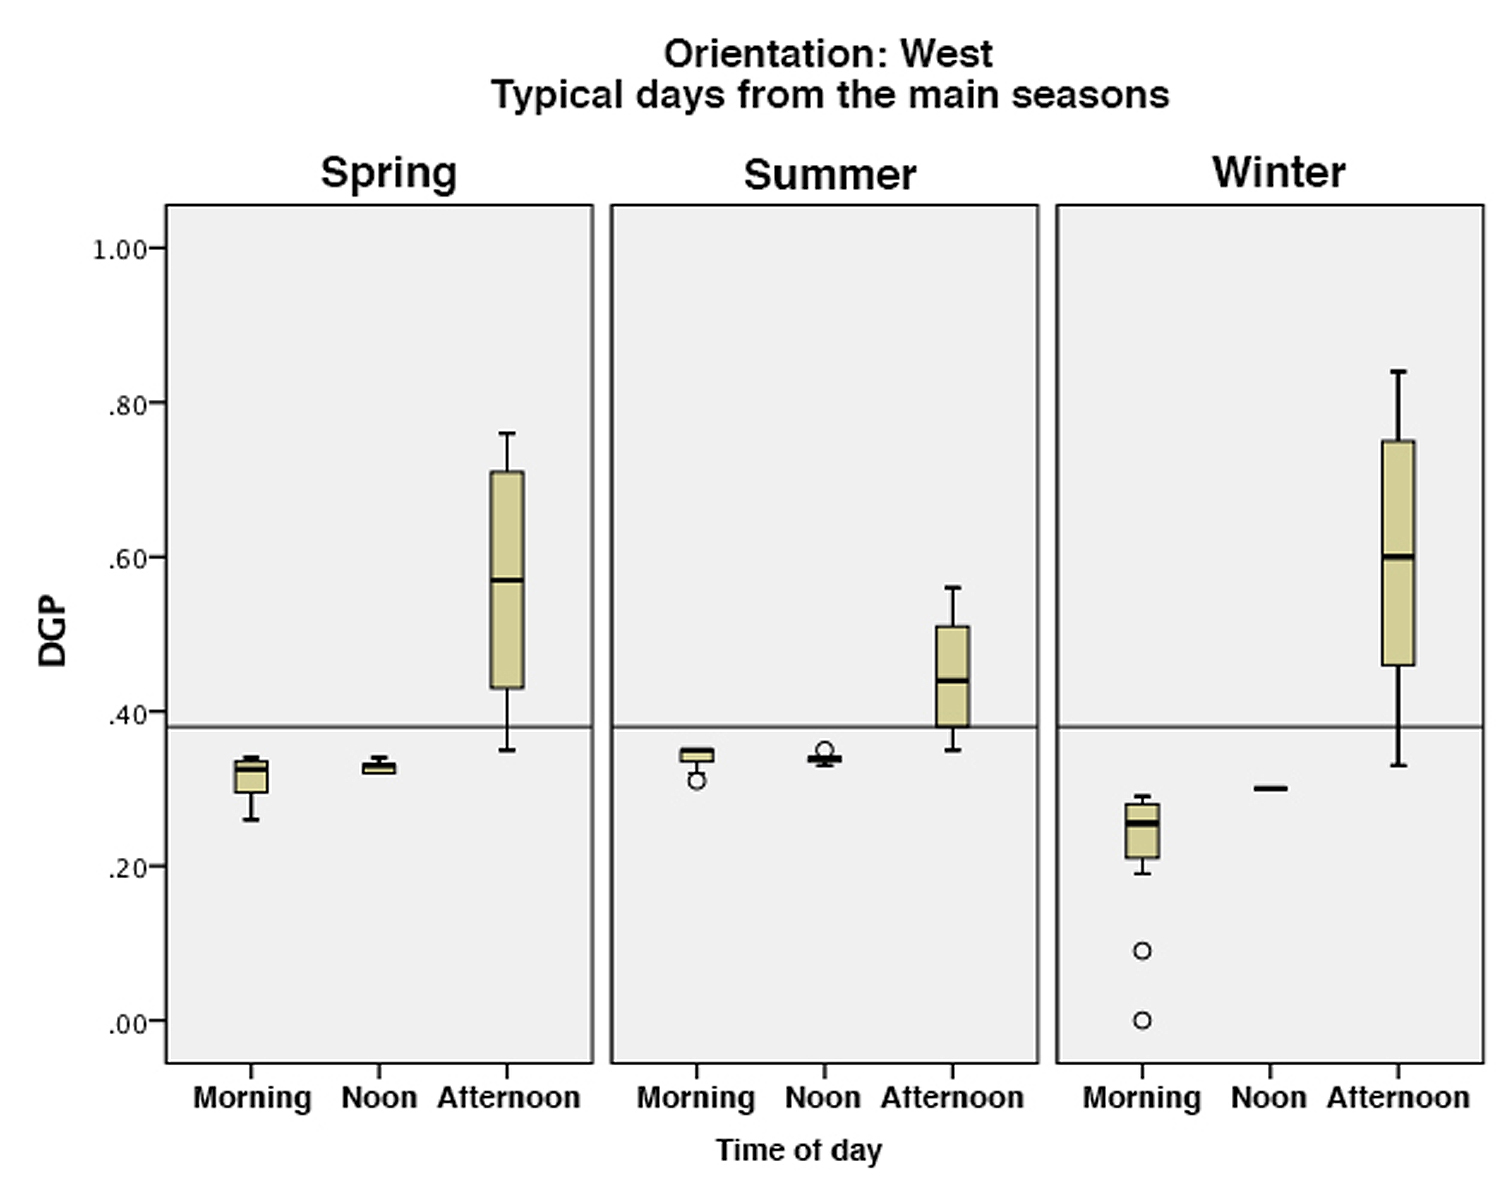 Box plot of DGP values for o_west on typical seasonal days in different times of day.